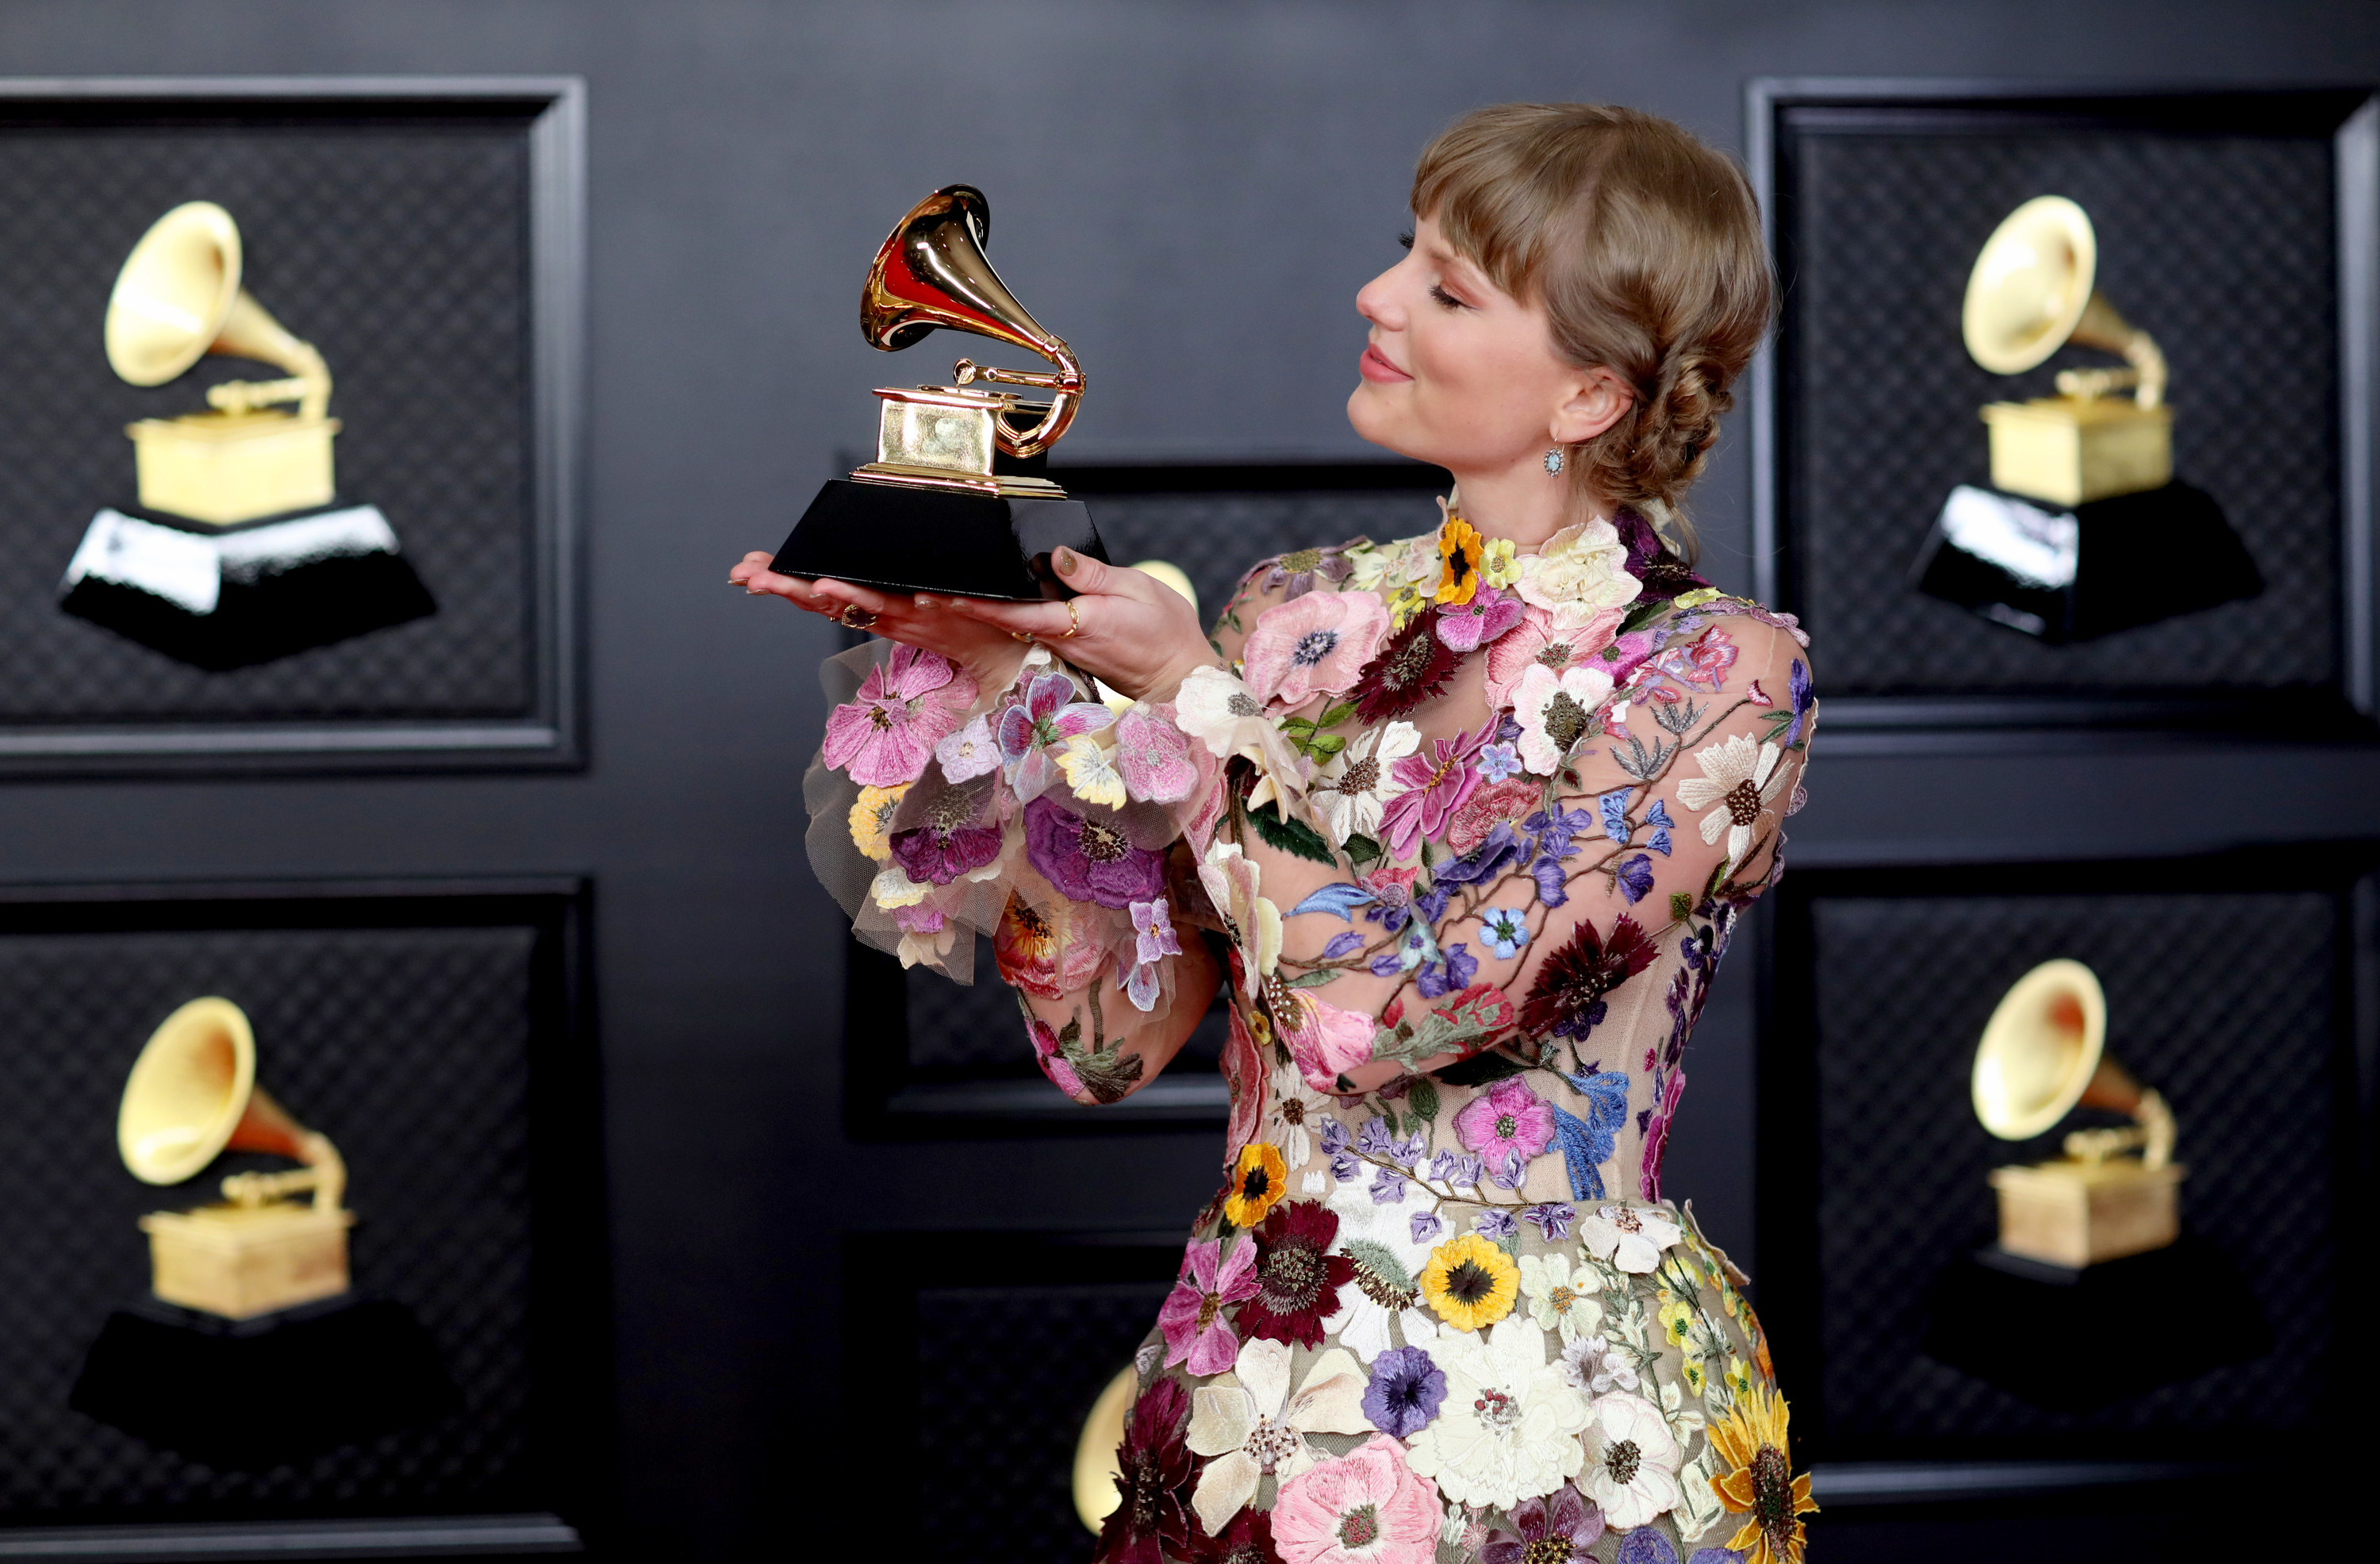 Taylor holding up and smiling at a Grammy she just won